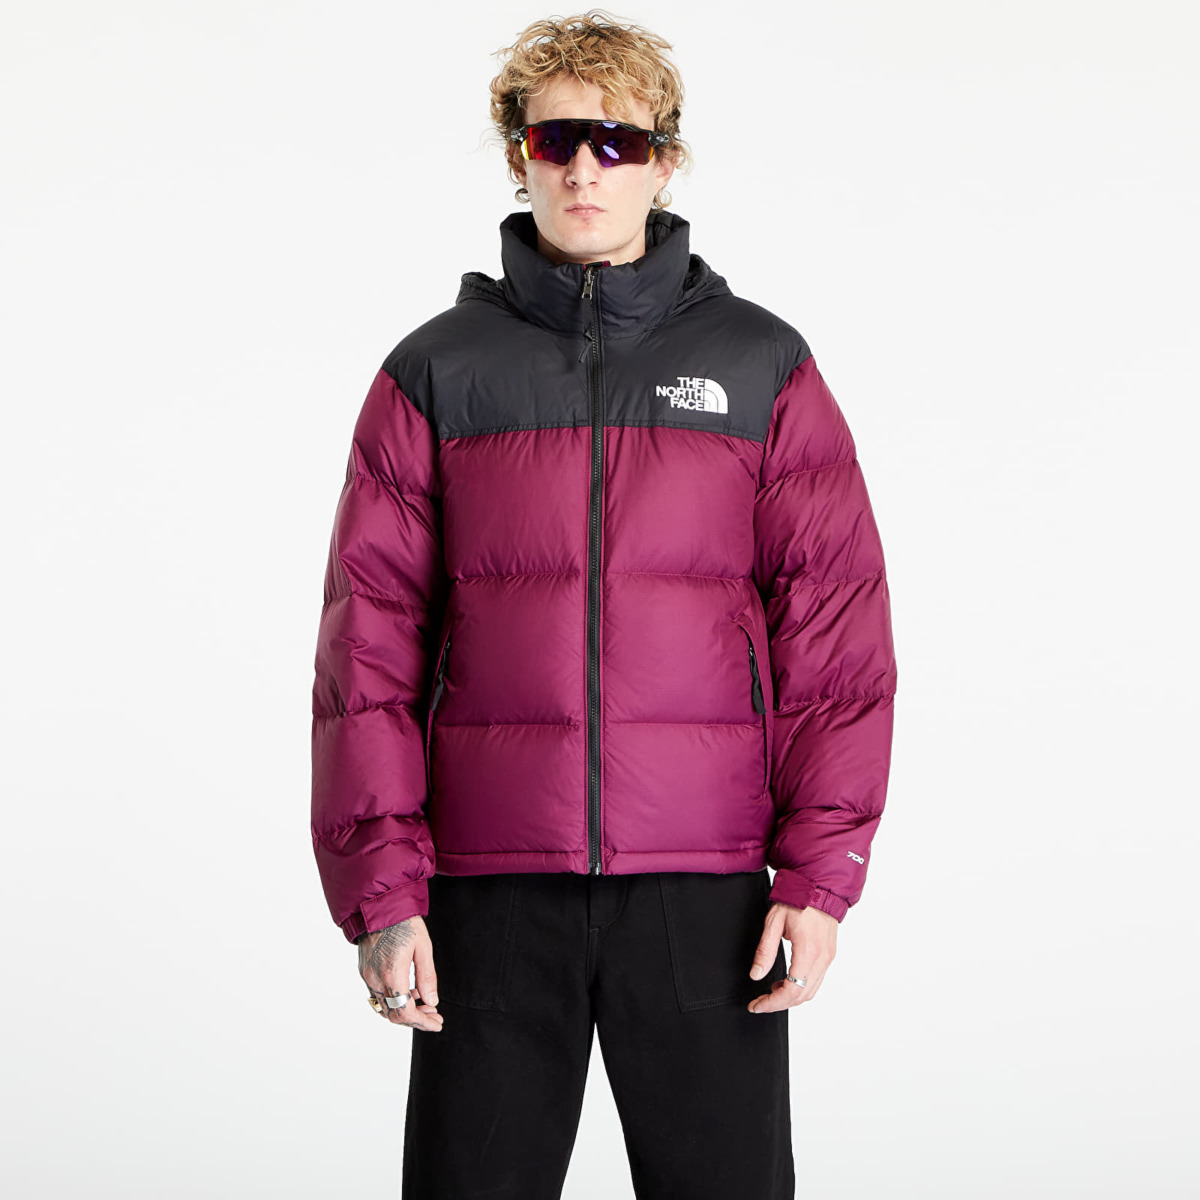 The North Face Gent Jacket in Purple by Footshop GOOFASH